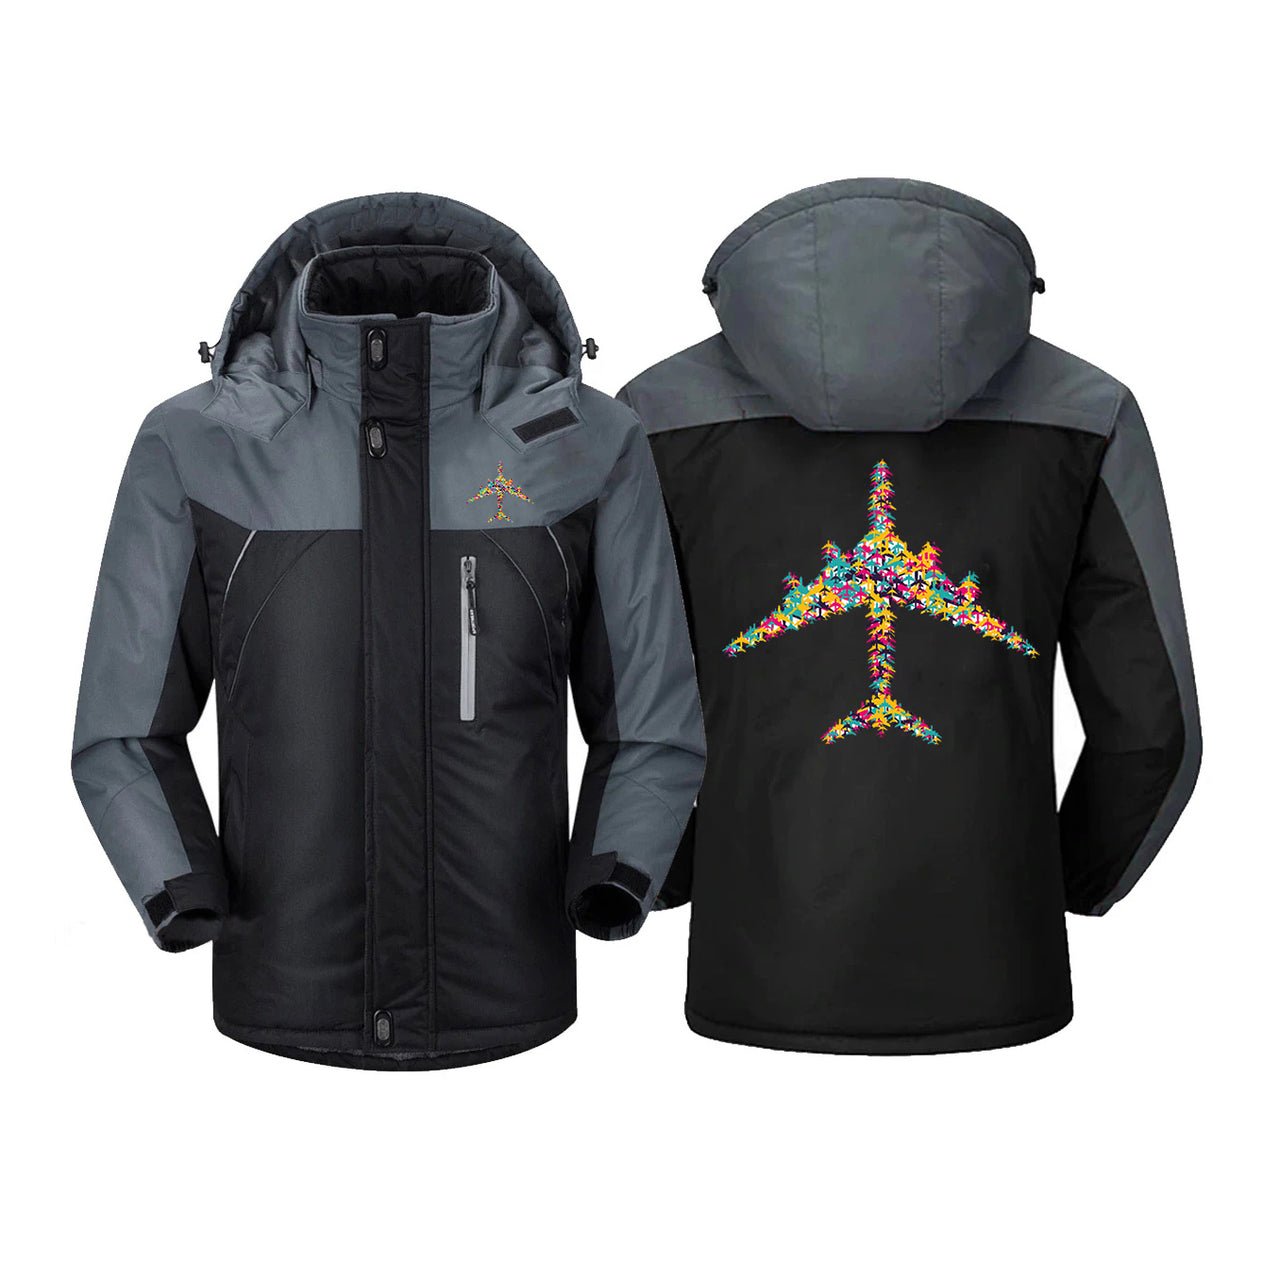 Colourful Airplane Designed Thick Winter Jackets